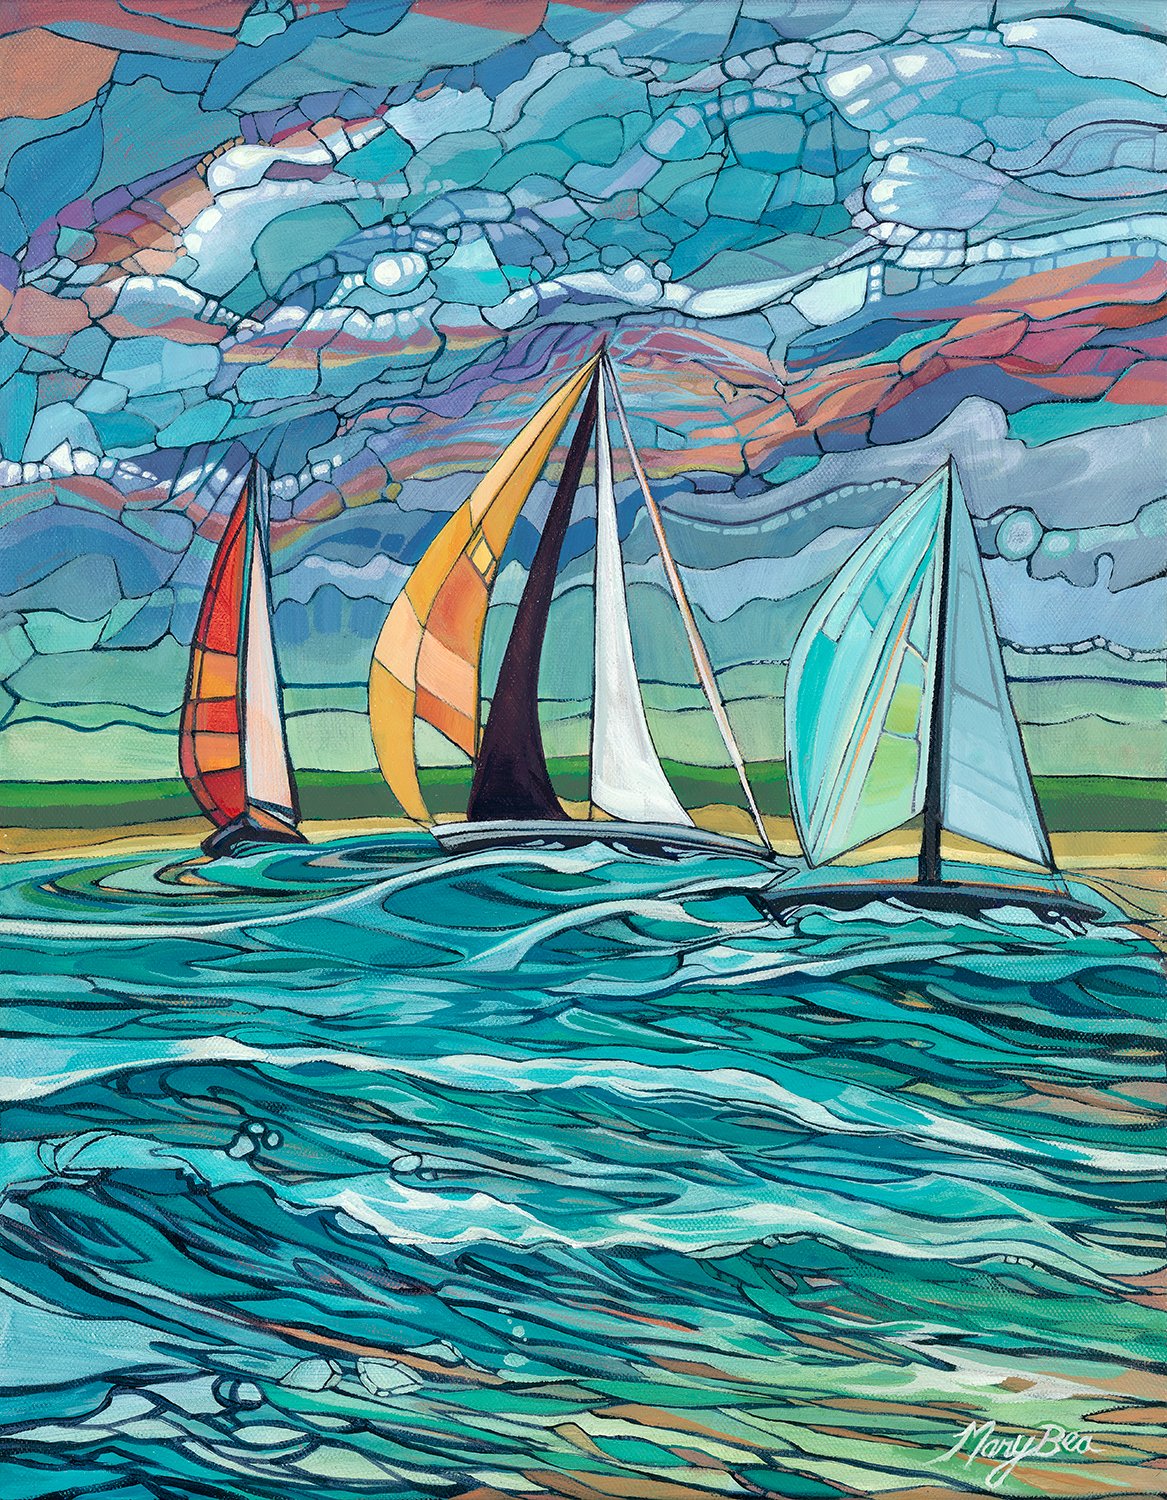 "Stained Glass Sailboats" Notecard